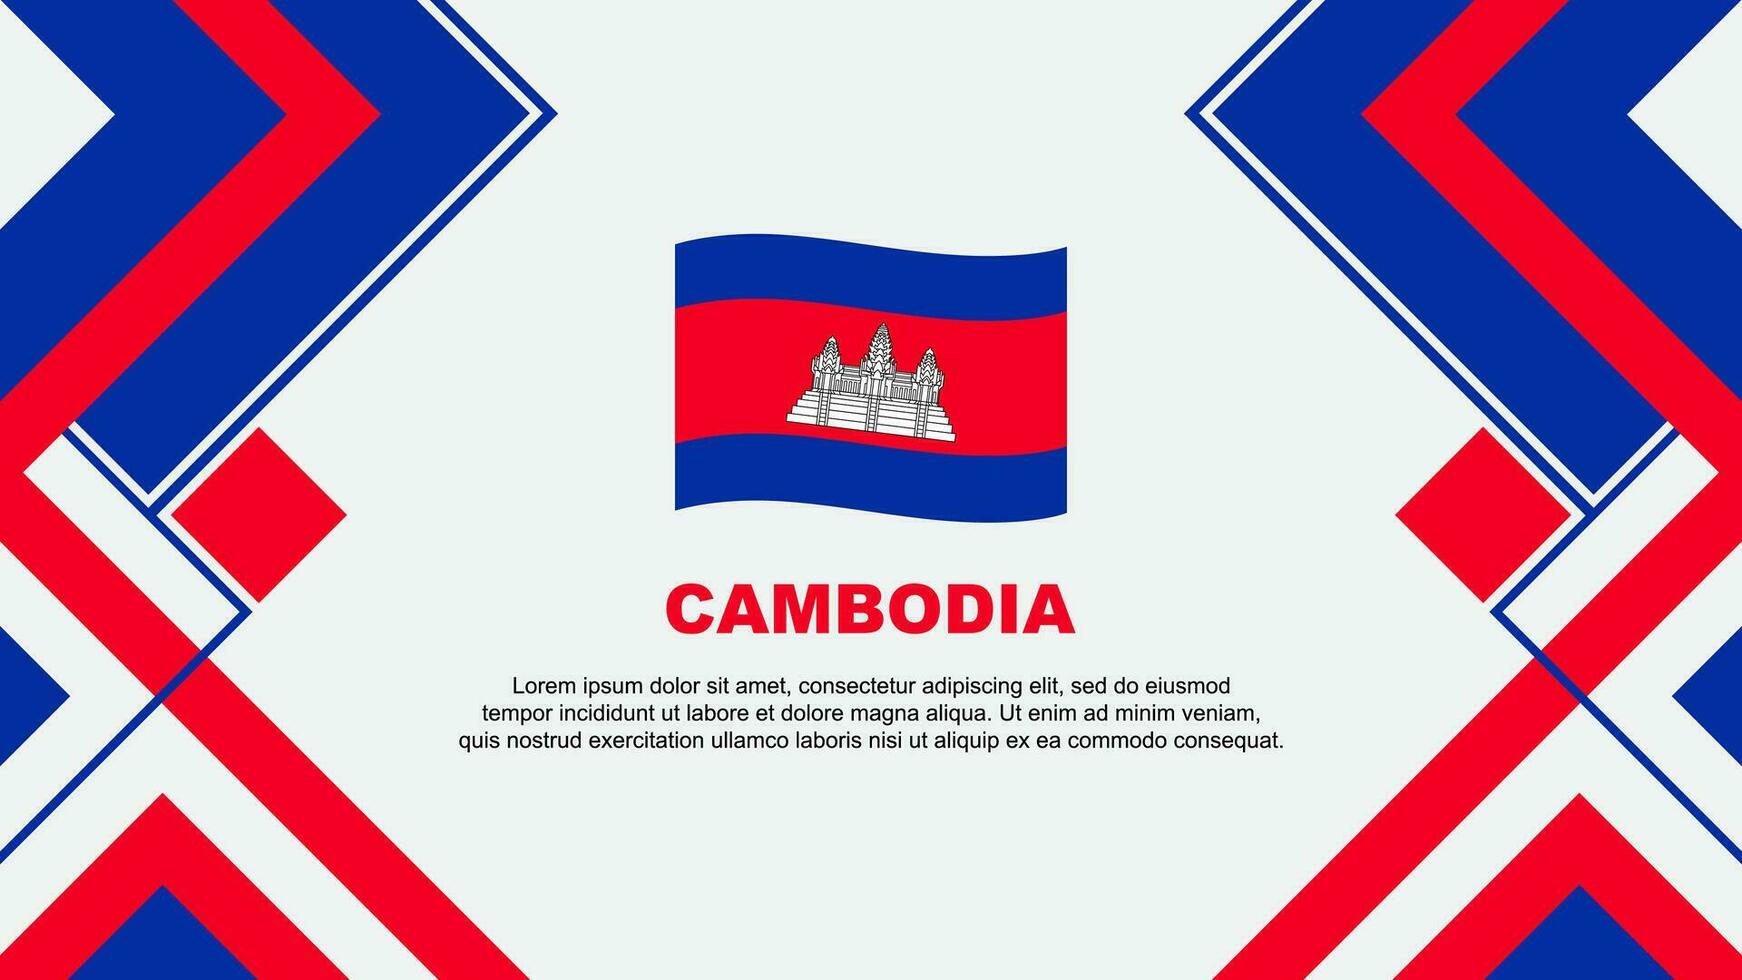 Cambodia Flag Abstract Background Design Template. Cambodia Independence Day Banner Wallpaper Vector Illustration. Cambodia Banner